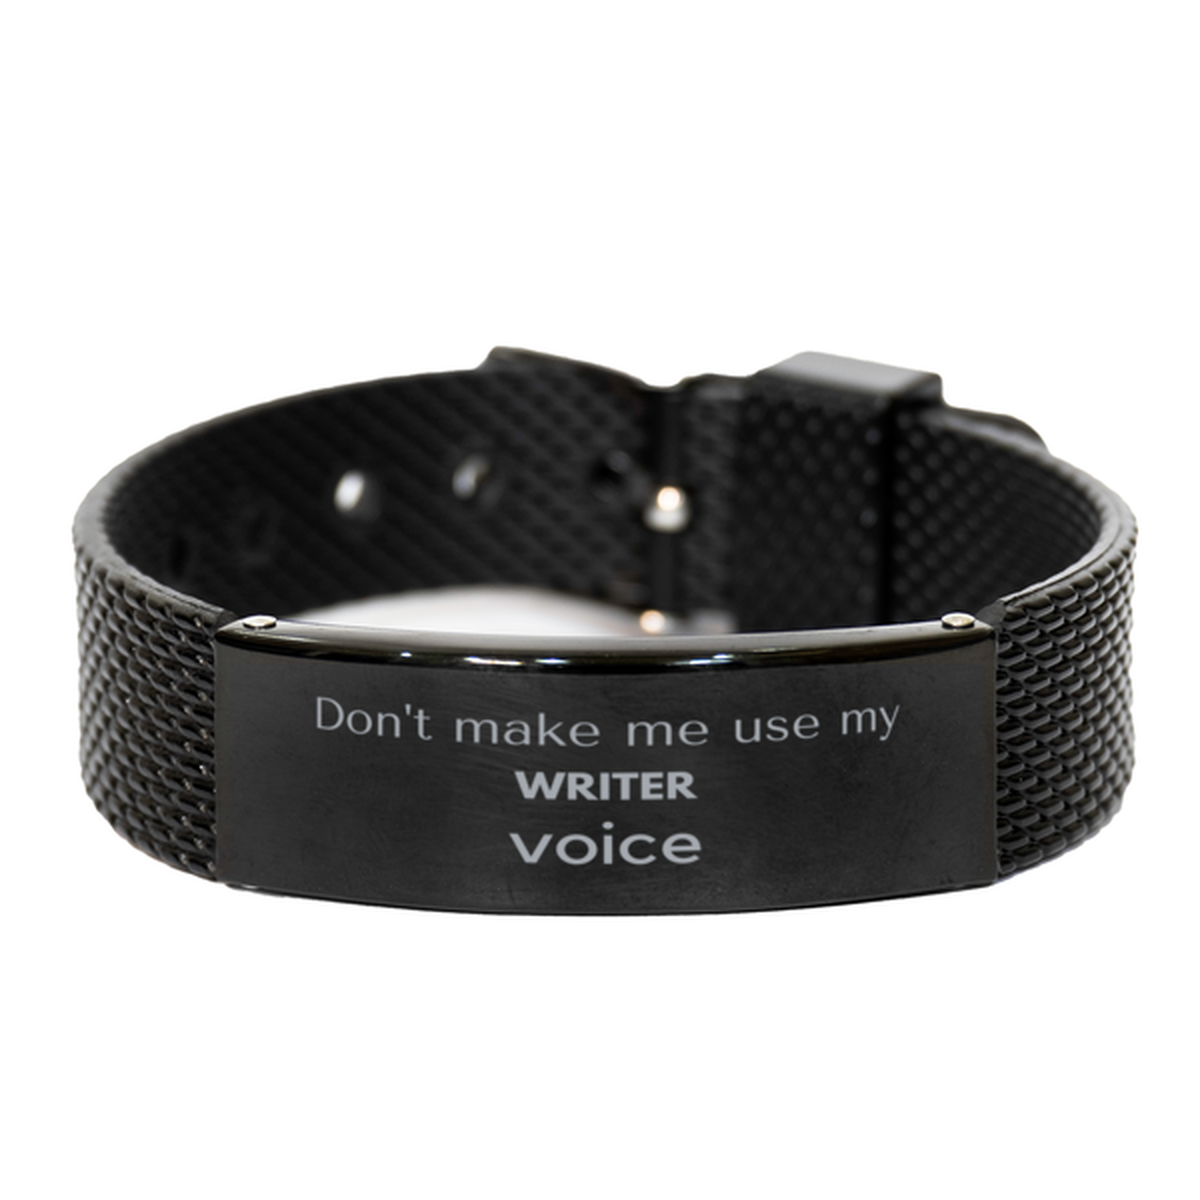 Don't make me use my Writer voice, Sarcasm Writer Gifts, Christmas Writer Black Shark Mesh Bracelet Birthday Unique Gifts For Writer Coworkers, Men, Women, Colleague, Friends